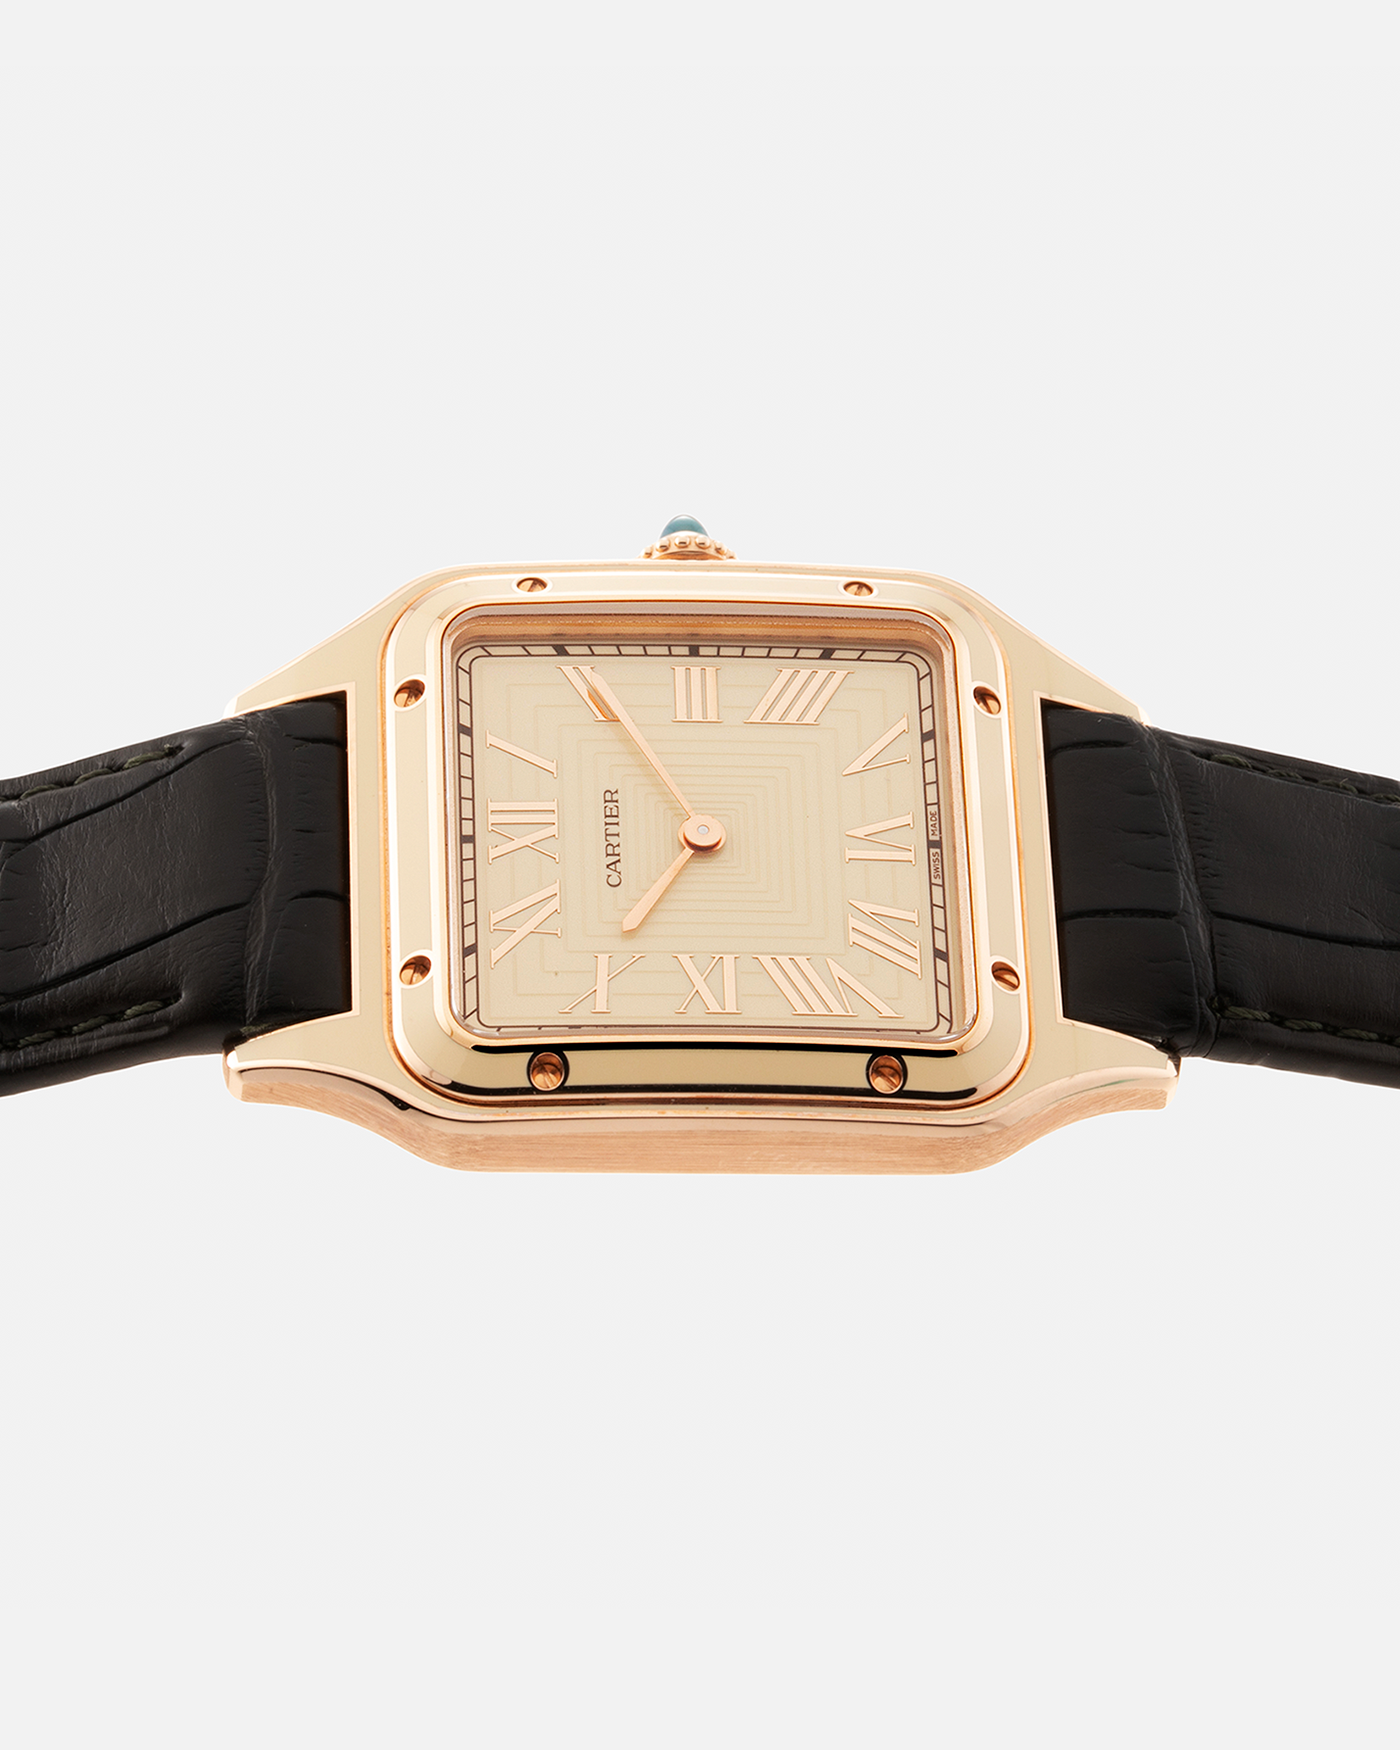 Brand: Cartier Year: 2022 Model: Santos-Dumont Large Material: 18-carat Rose Gold, Beige Lacquer Movement: Cartier Cal. 430 MC, Manual-Winding Case Diameter: 43.5mm x 31.4mm Bracelet / Strap: Cartier Black Alligator Leather Strap with Signed 18-carat Rose Gold Tang Buckle